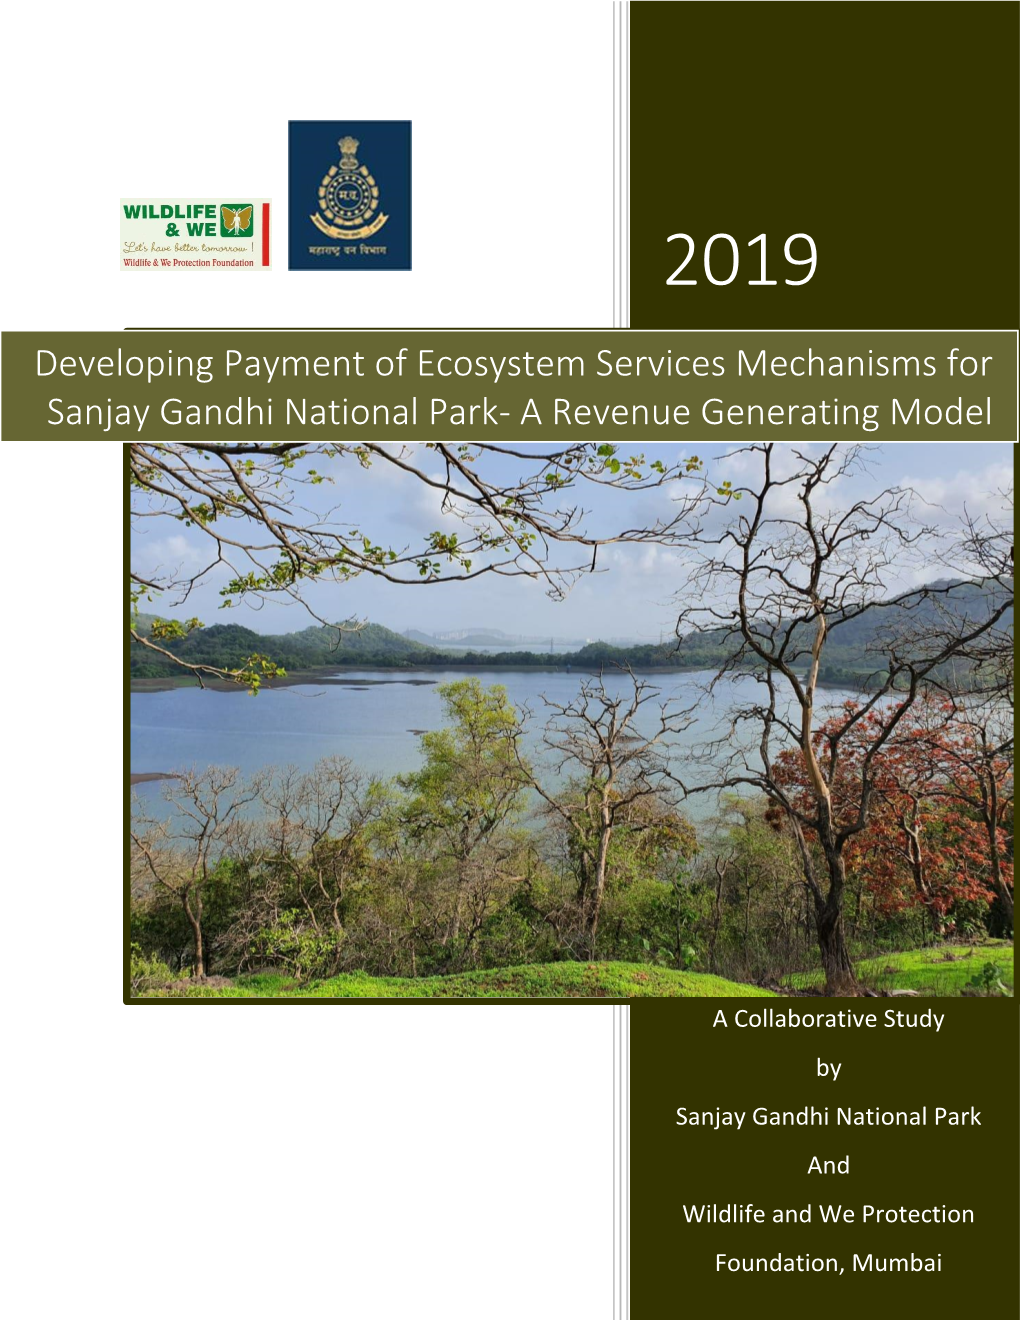 Developing Payment of Ecosystem Services Mechanisms for Sanjay Gandhi National Park- a Revenue Generating Model